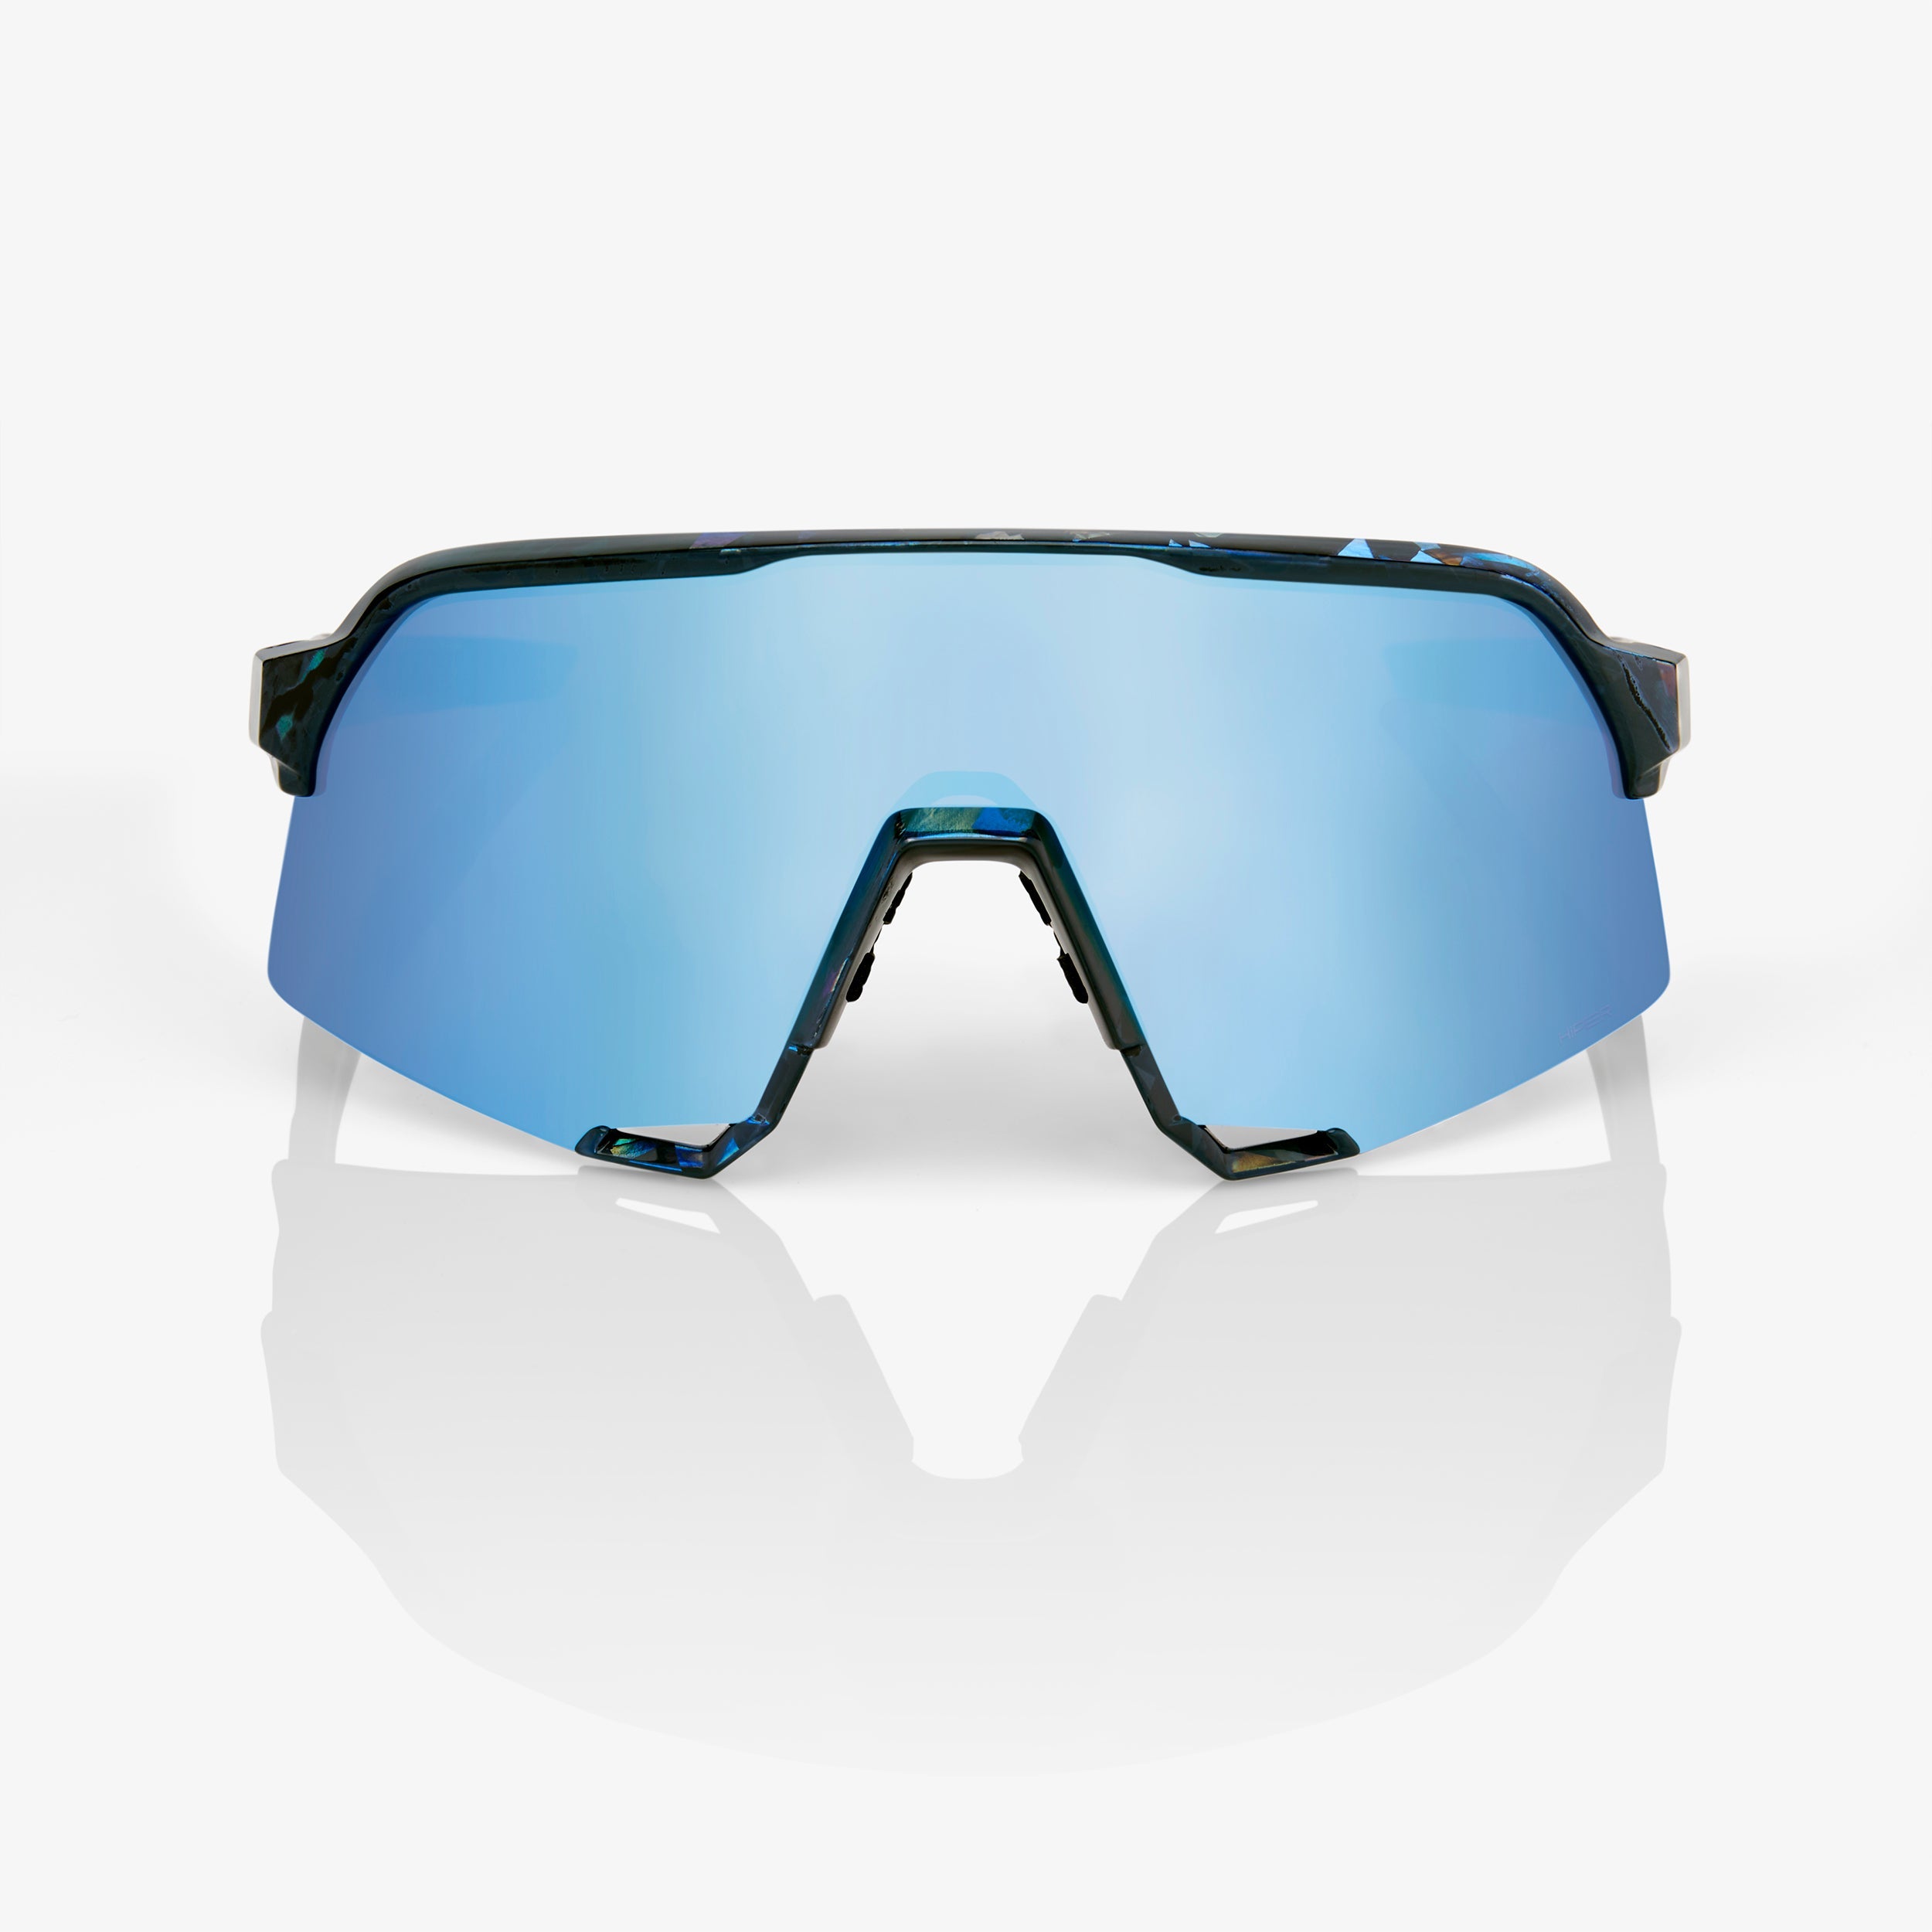 S3™ - Black Holographic - HiPER Blue Multilayer Mirror Lens - Secondary